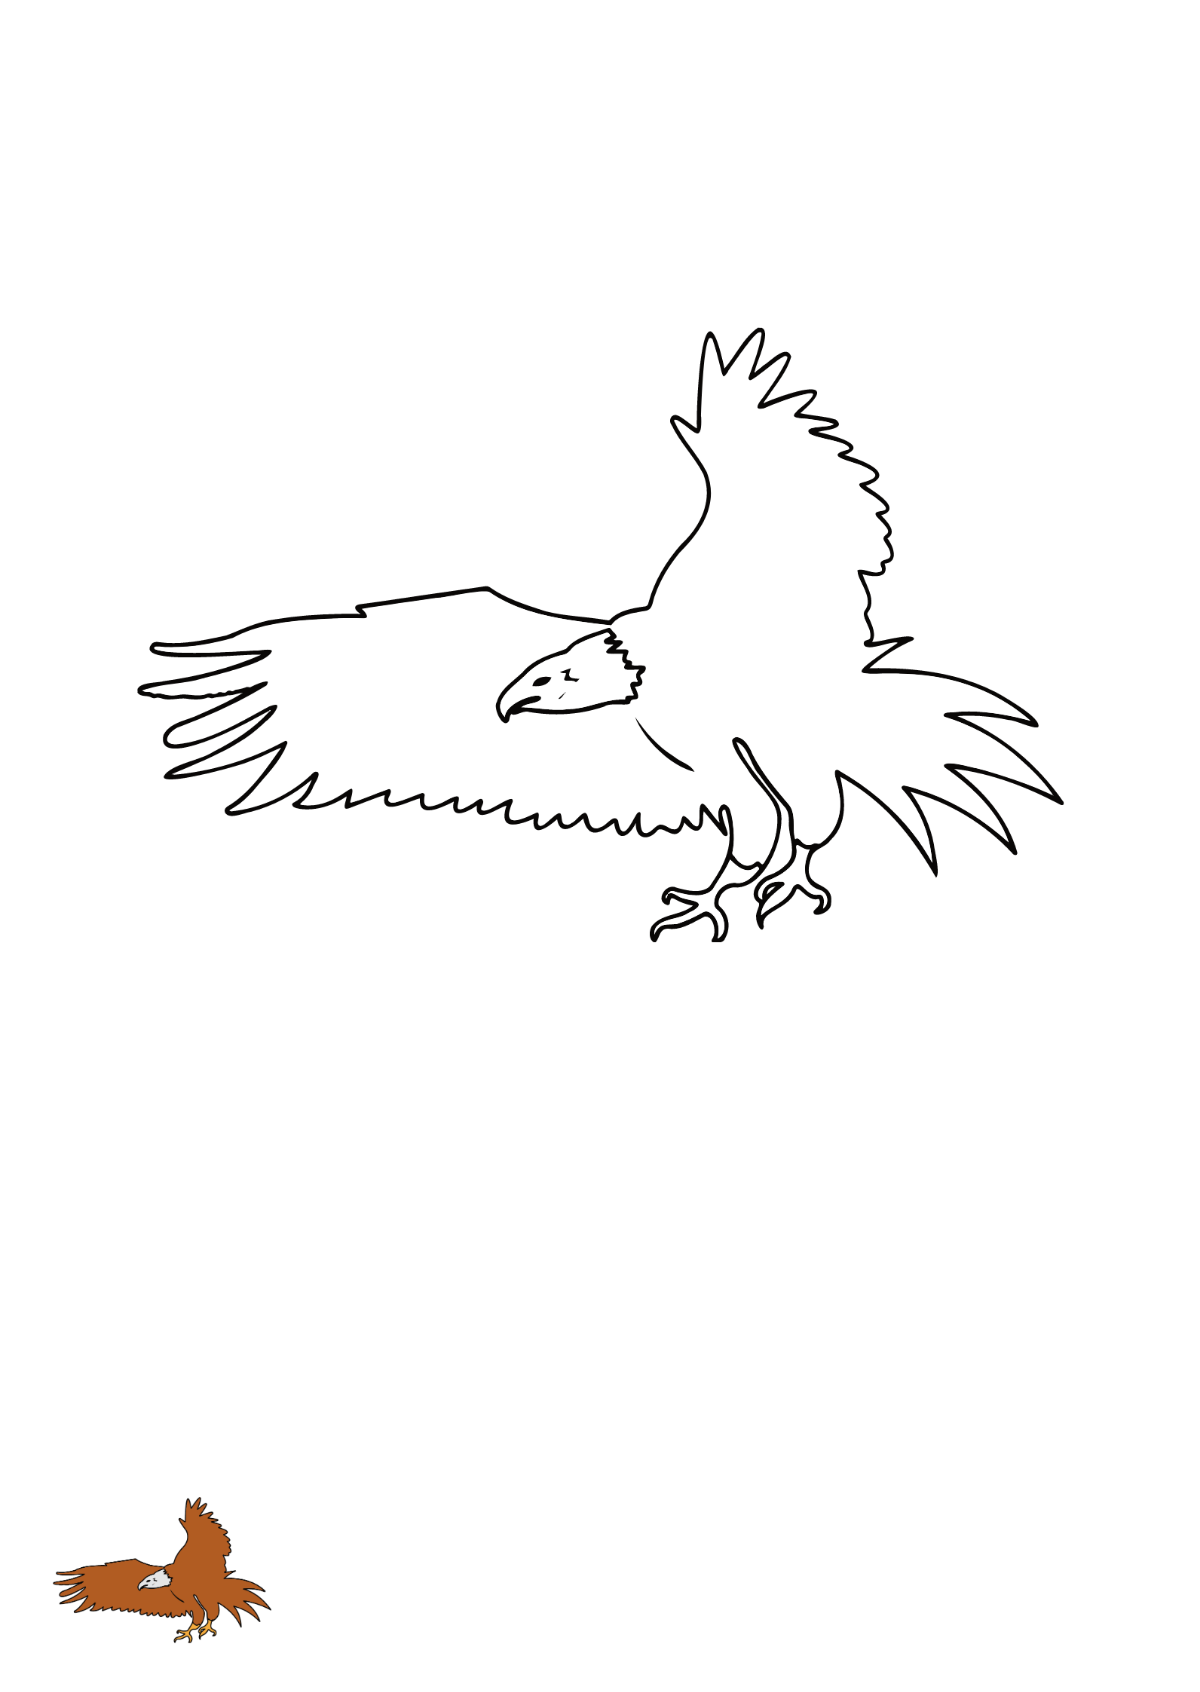 Soaring Eagle coloring page Template